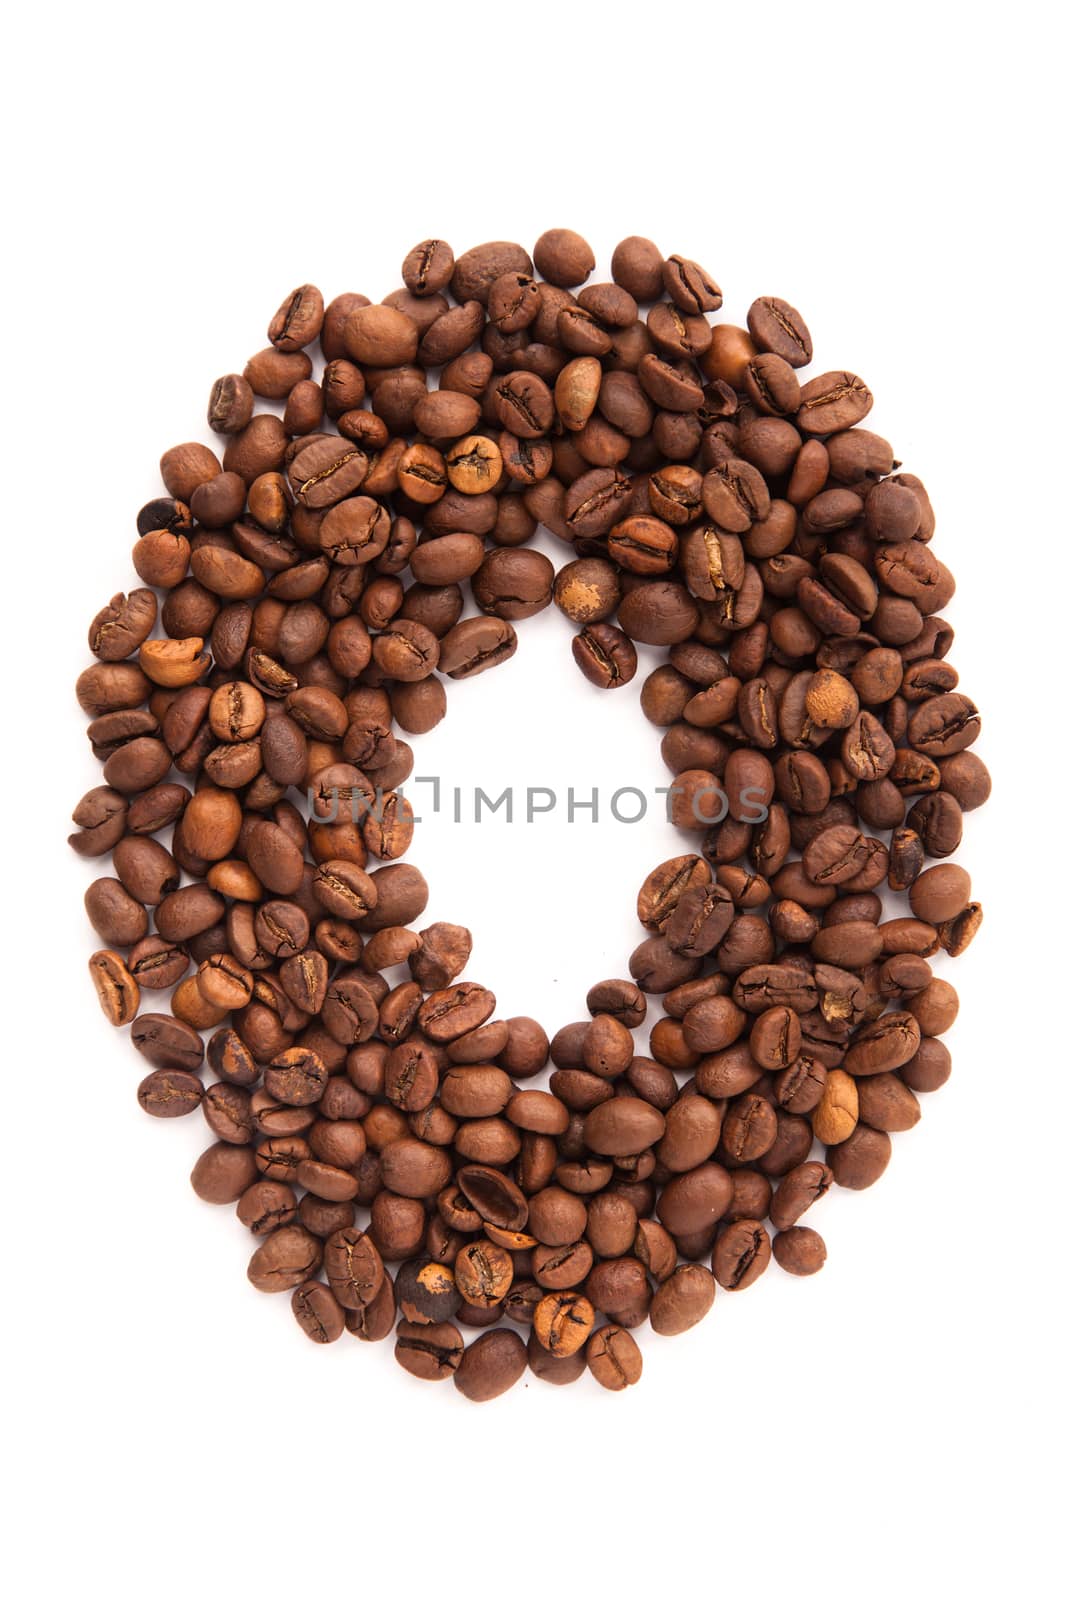 Alphabet letter O of roasted coffee beans isolated on white background by traza